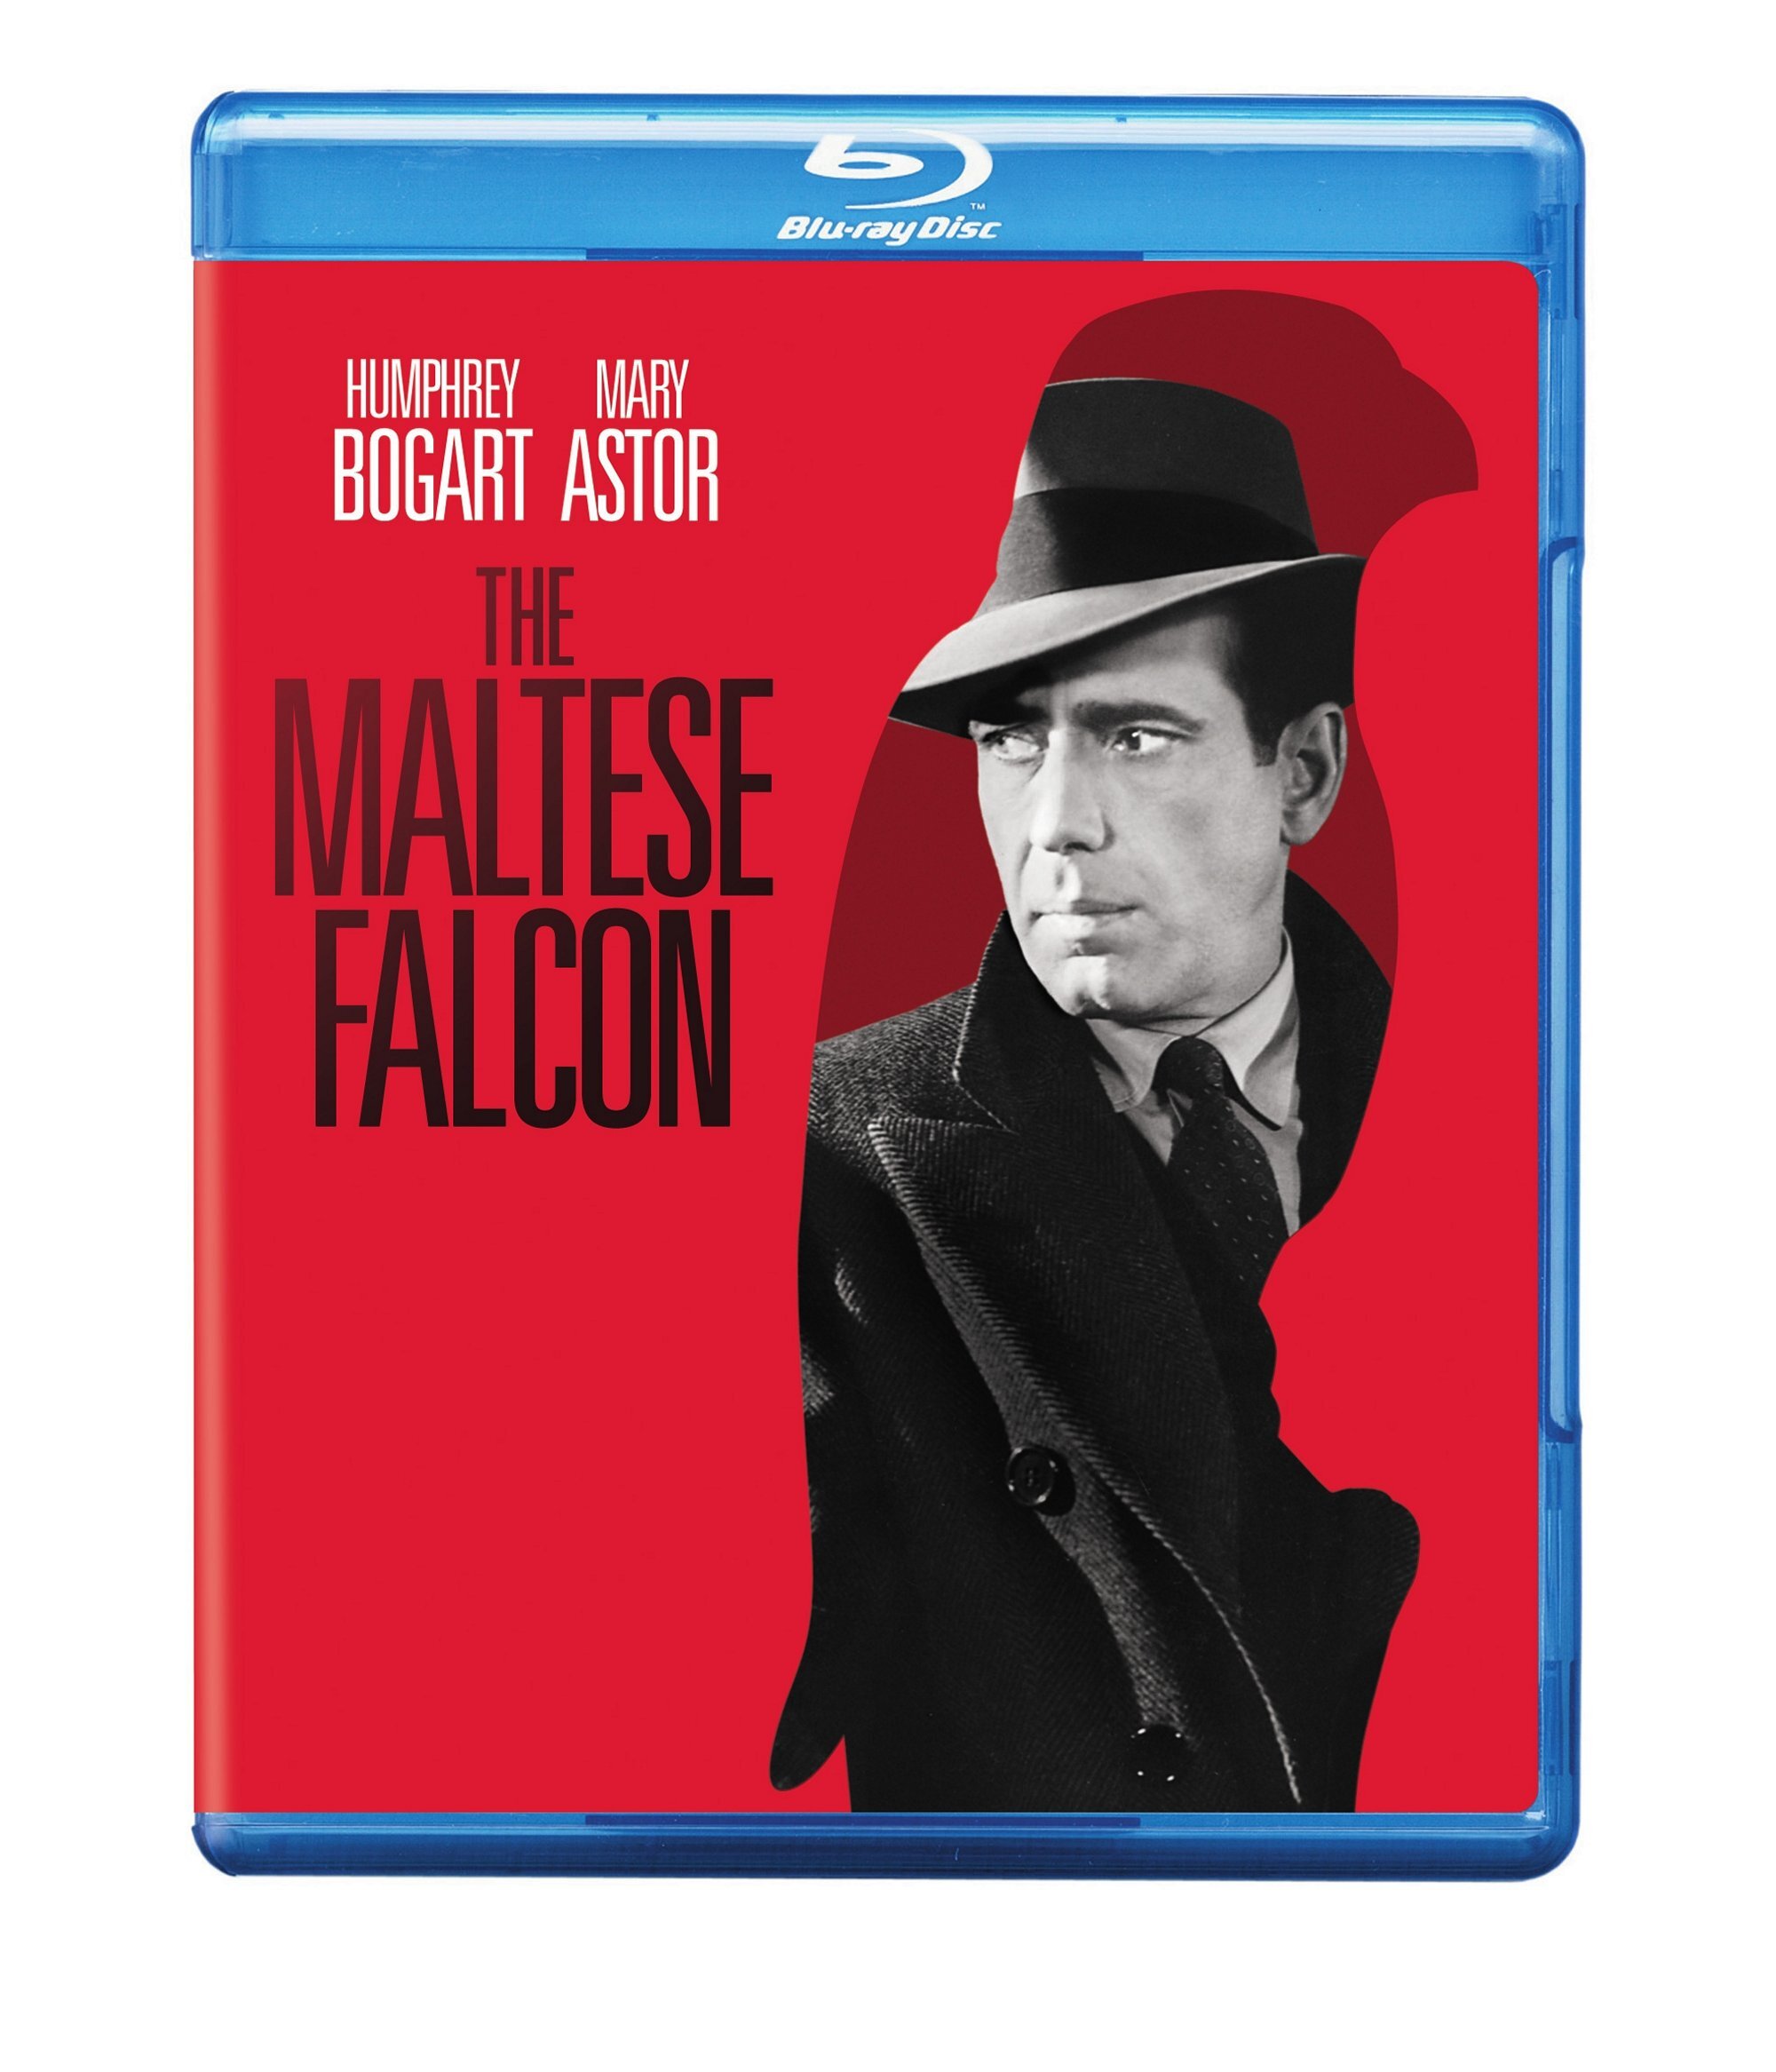 The Maltese Falcon - Blu-ray [ 1941 ]  - Classic Movies On Blu-ray - Movies On GRUV